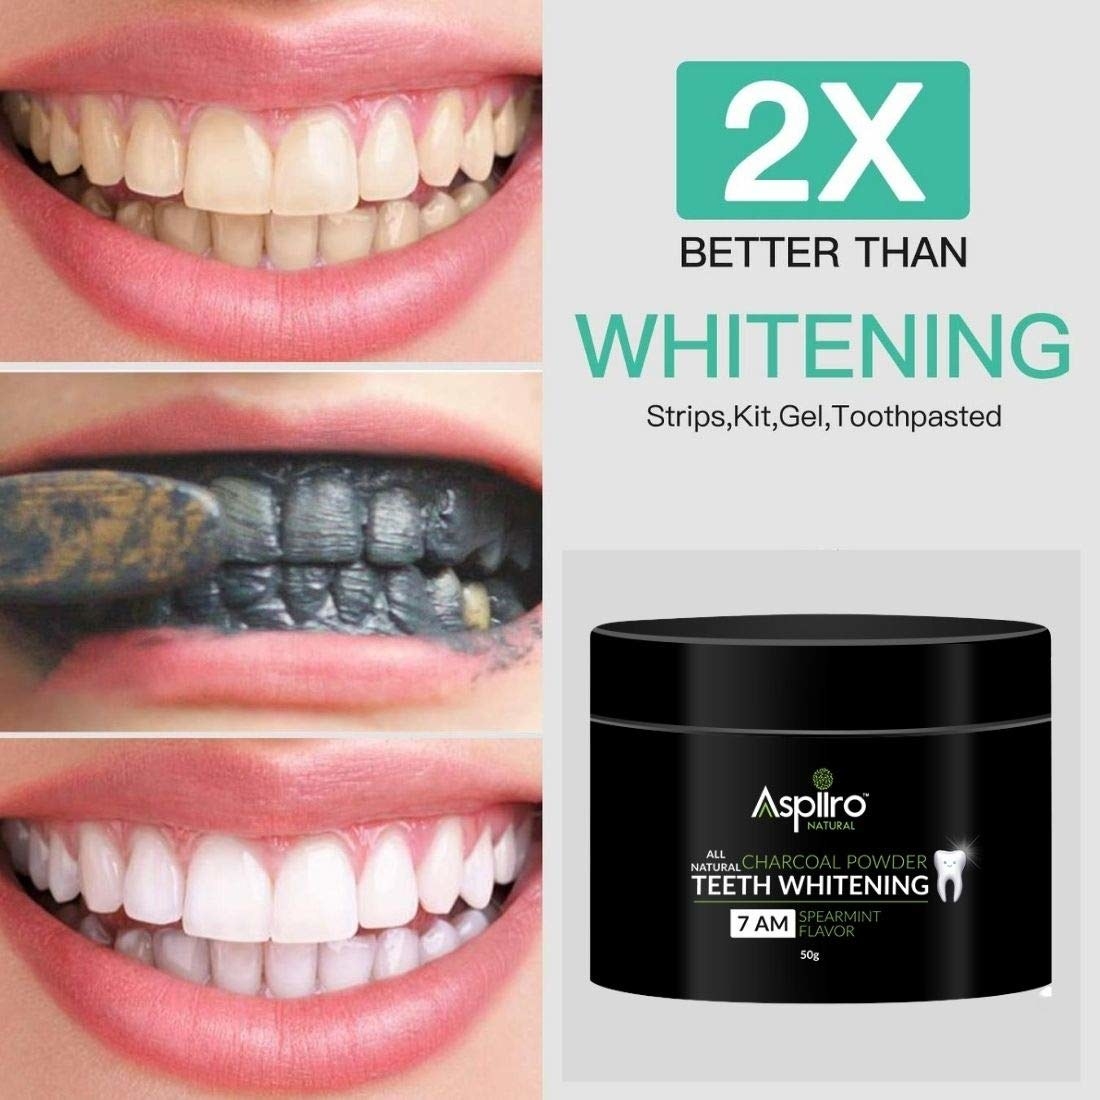 Before-and-after images of a person using the powder. Their teeth are noticeably whiter after using the powder.